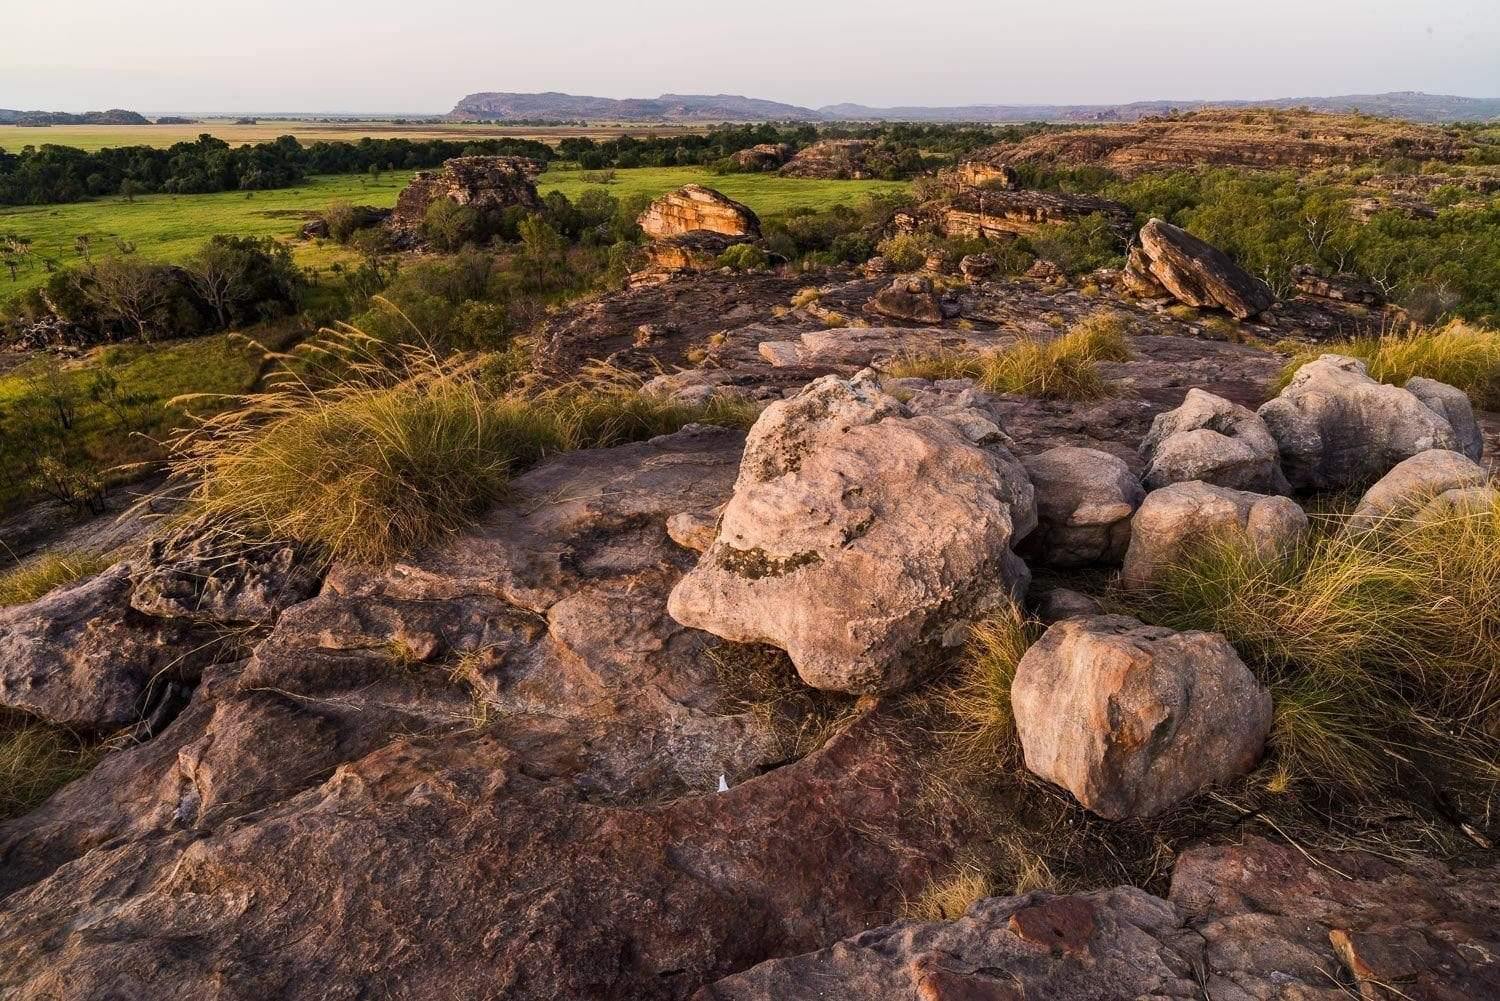 A rocky land with some stones, and a long greenfield area in the background, Kakadu Territory - Northern Territory